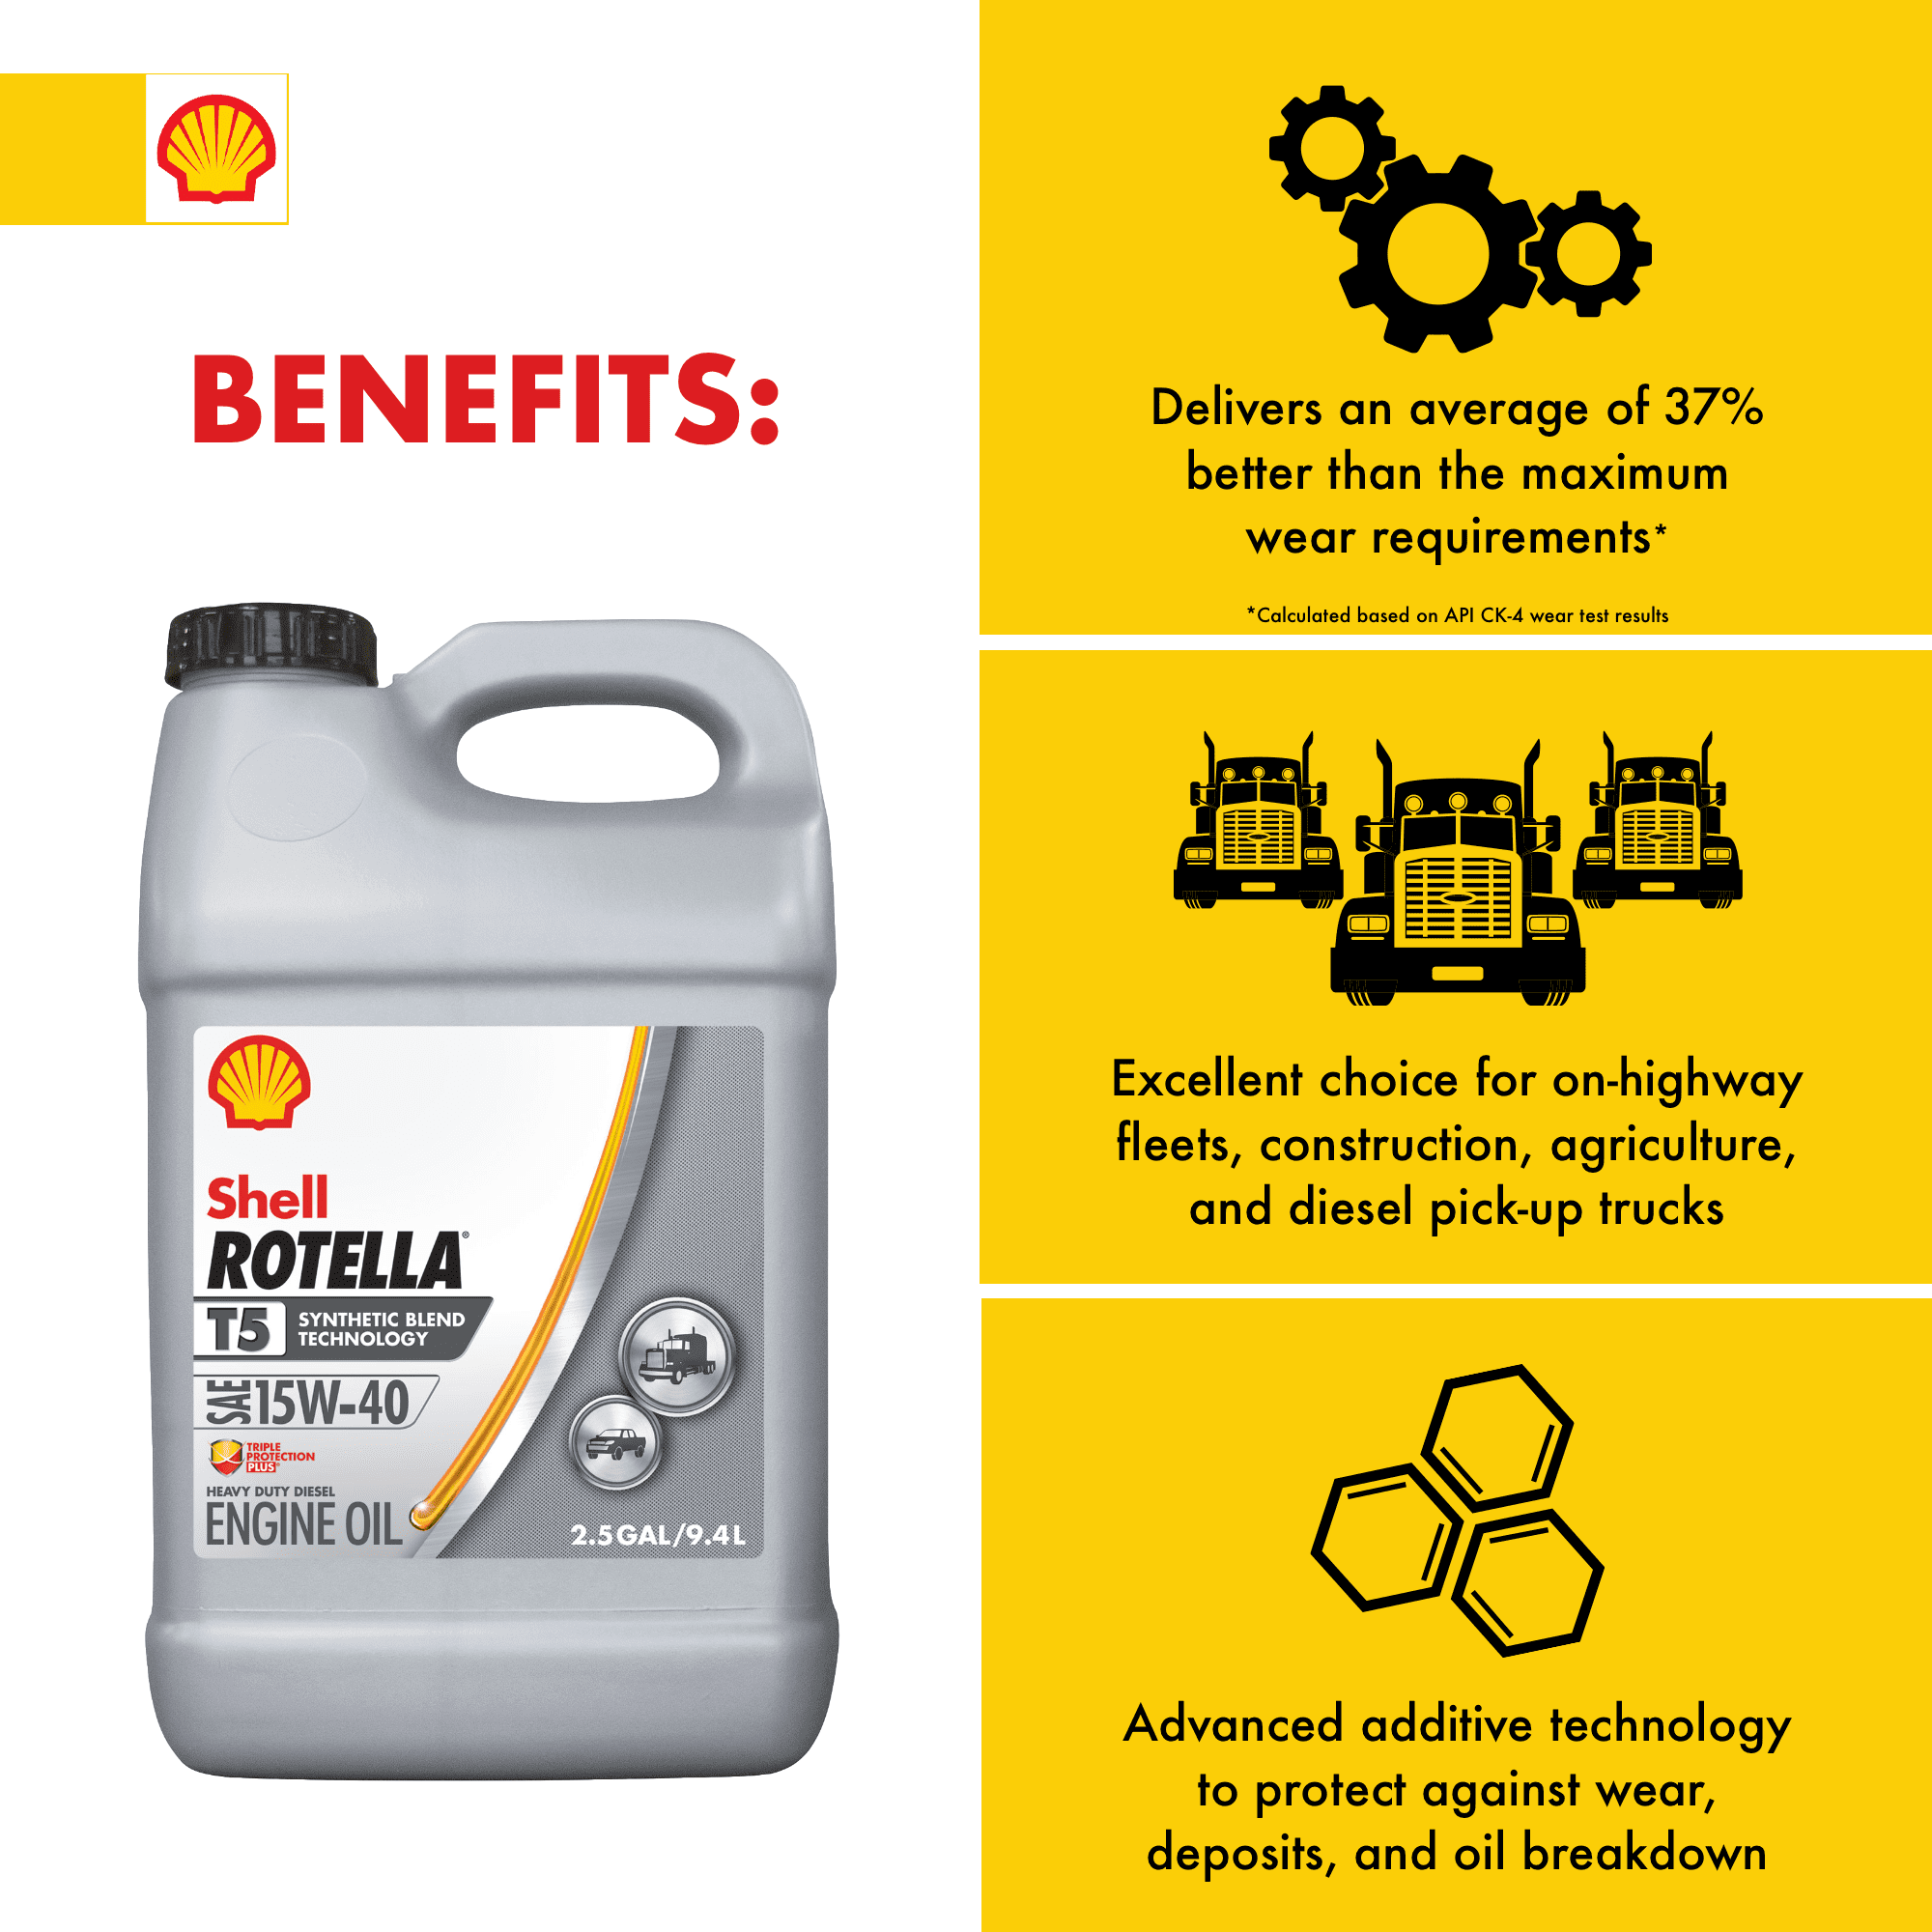 Shell Rotella T5 Synthetic Blend 15W-40 Diesel Engine Oil, 2.5 Gallon - 1